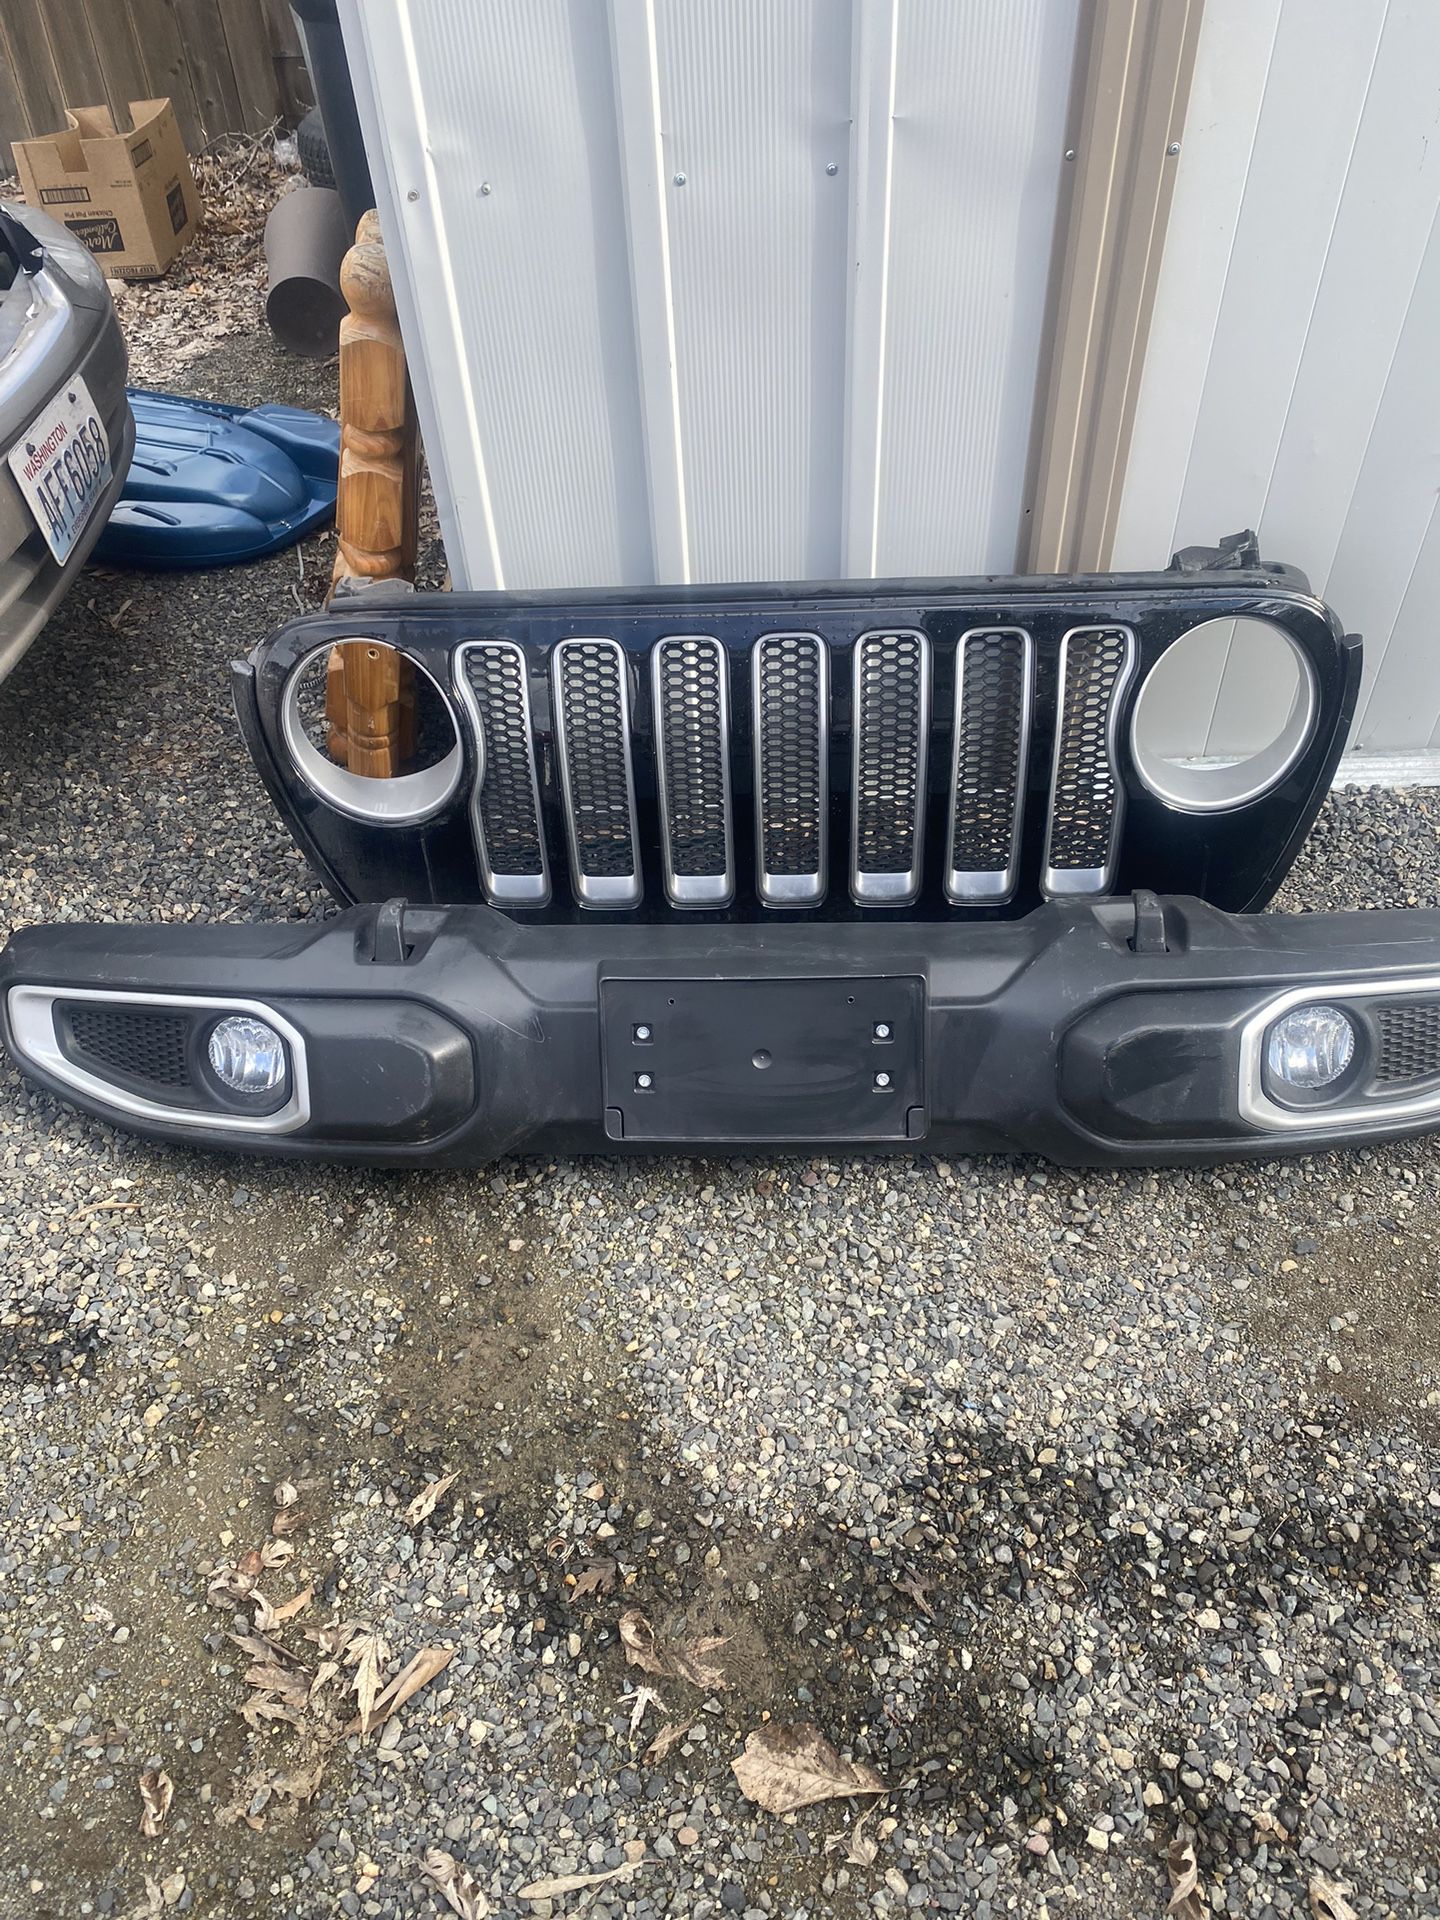 Jeep Wrangler Bumper And Grill